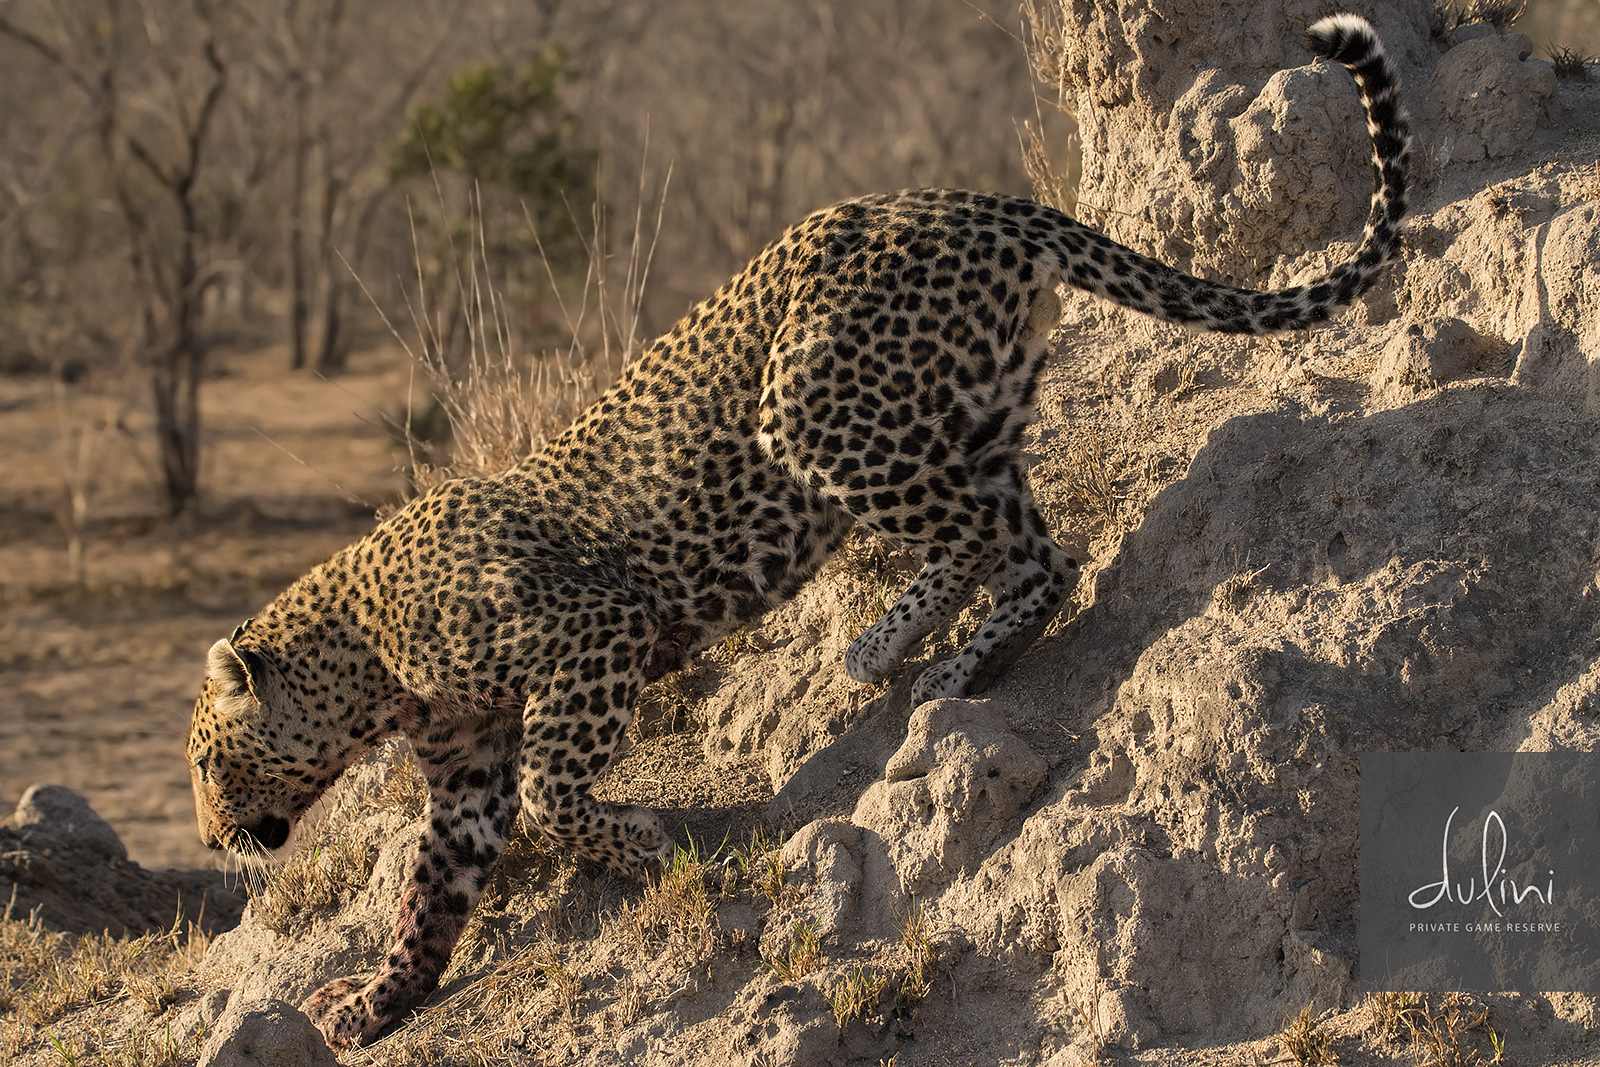 A few minutes later he went back to the Warthog to hide the carcass from Hyenae or other predators that could challenge him for the Warthog.